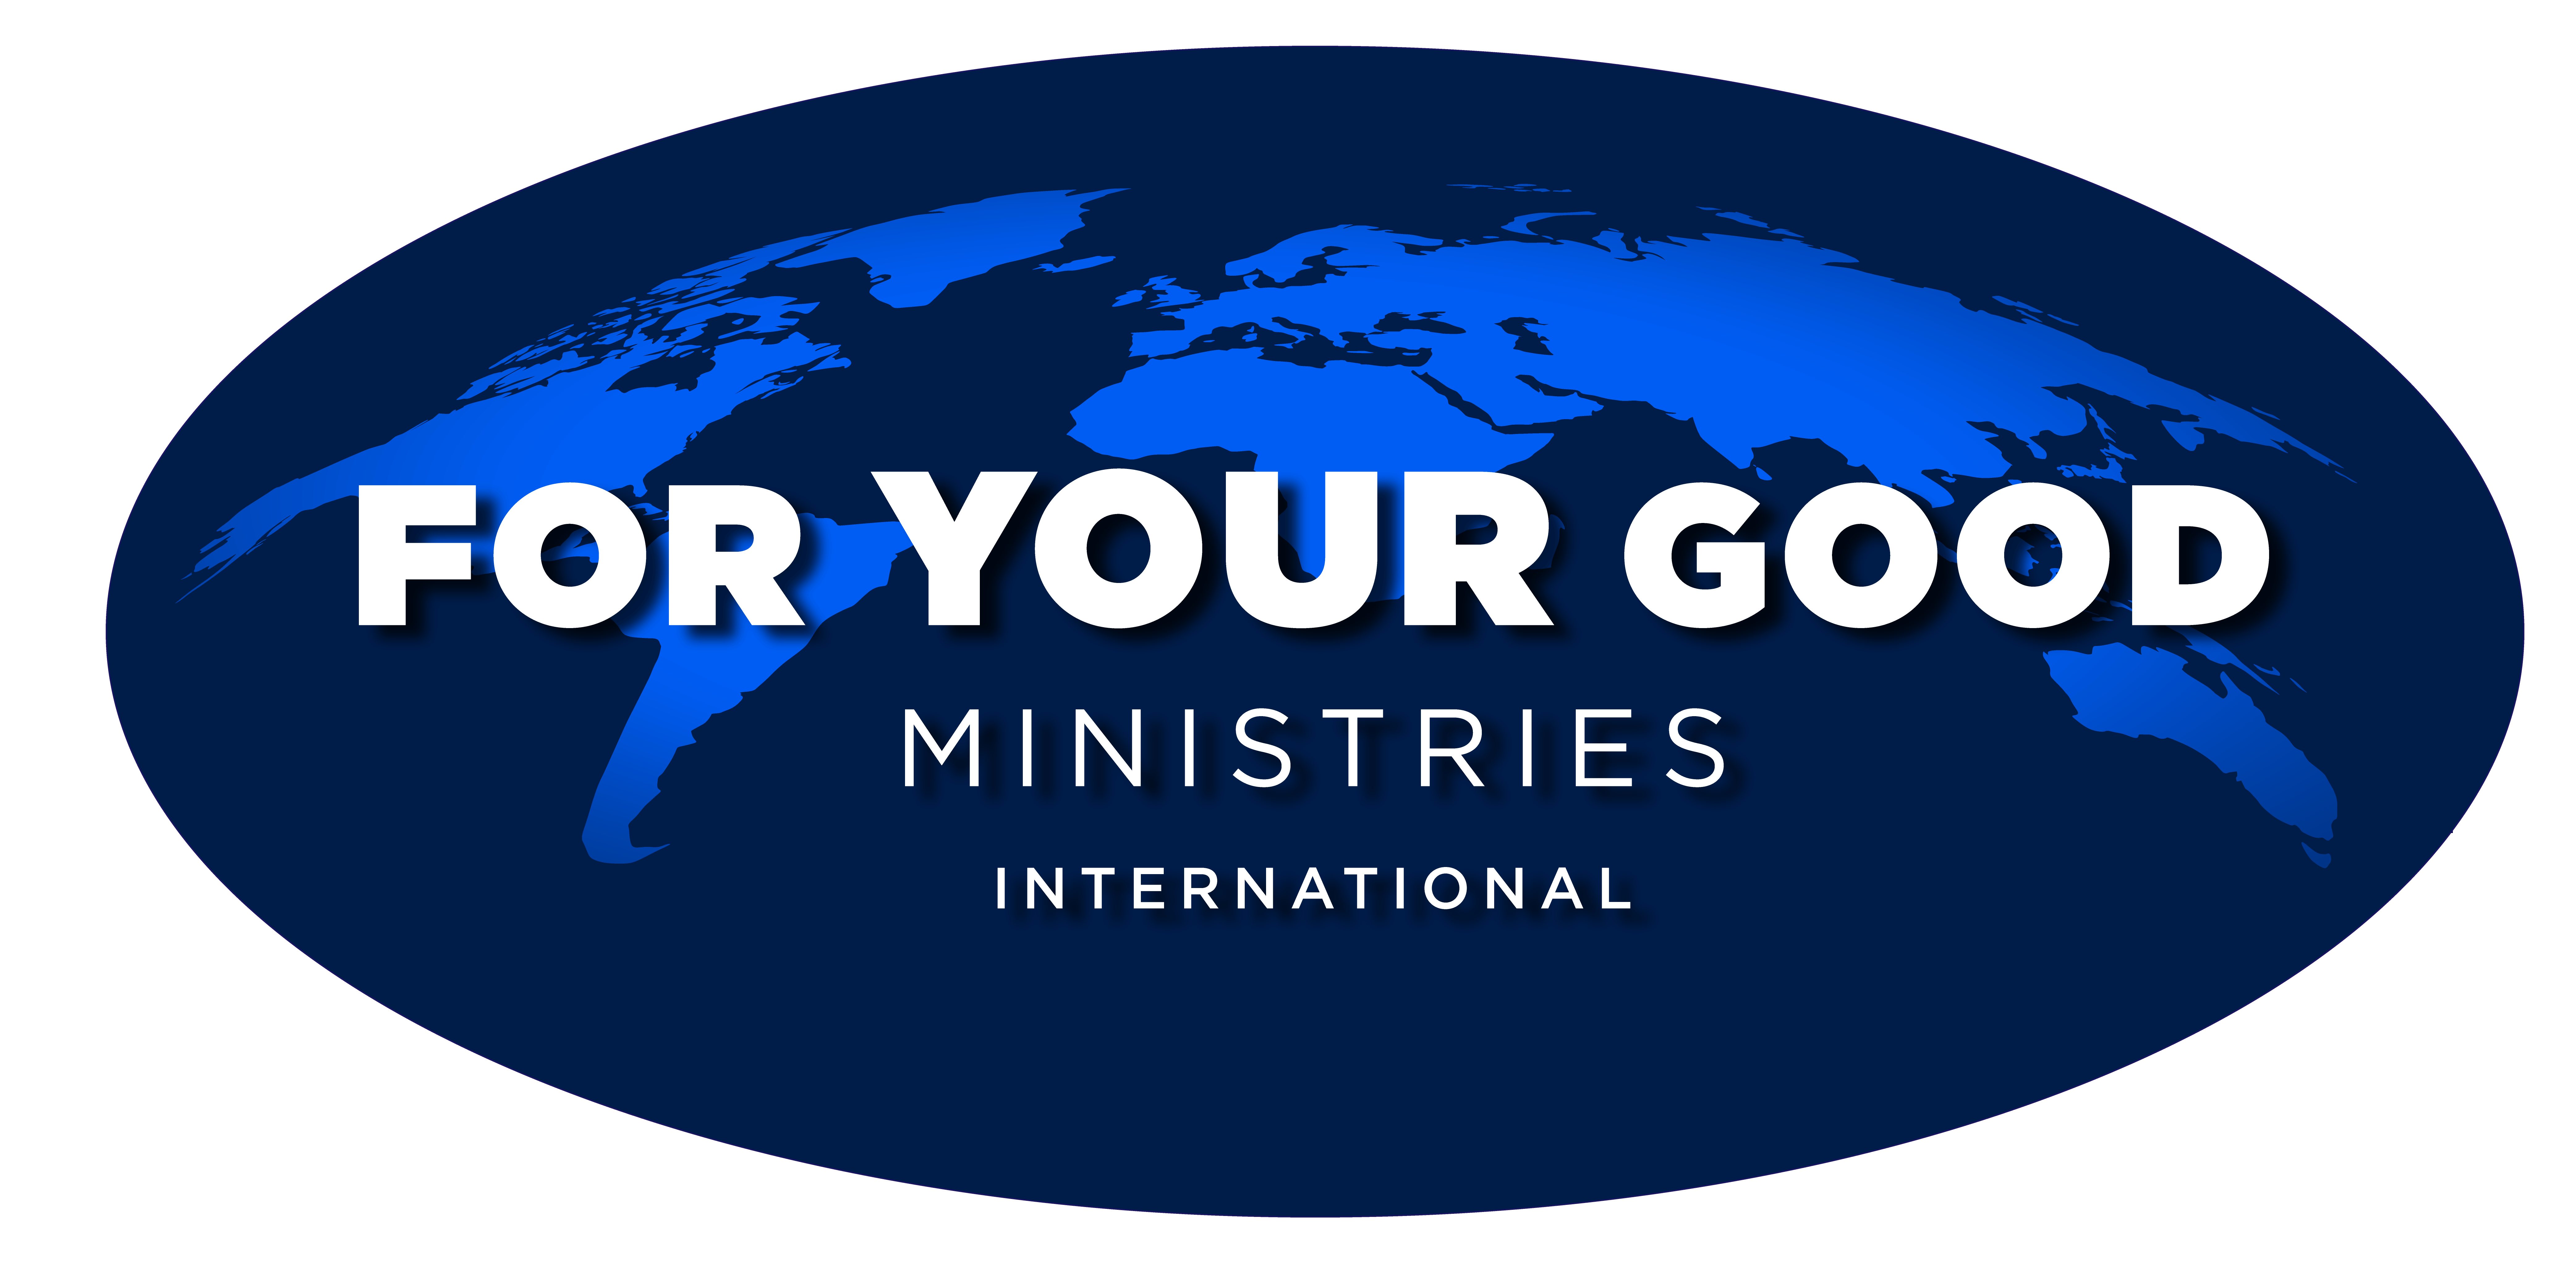 For Your Good Ministries International logo